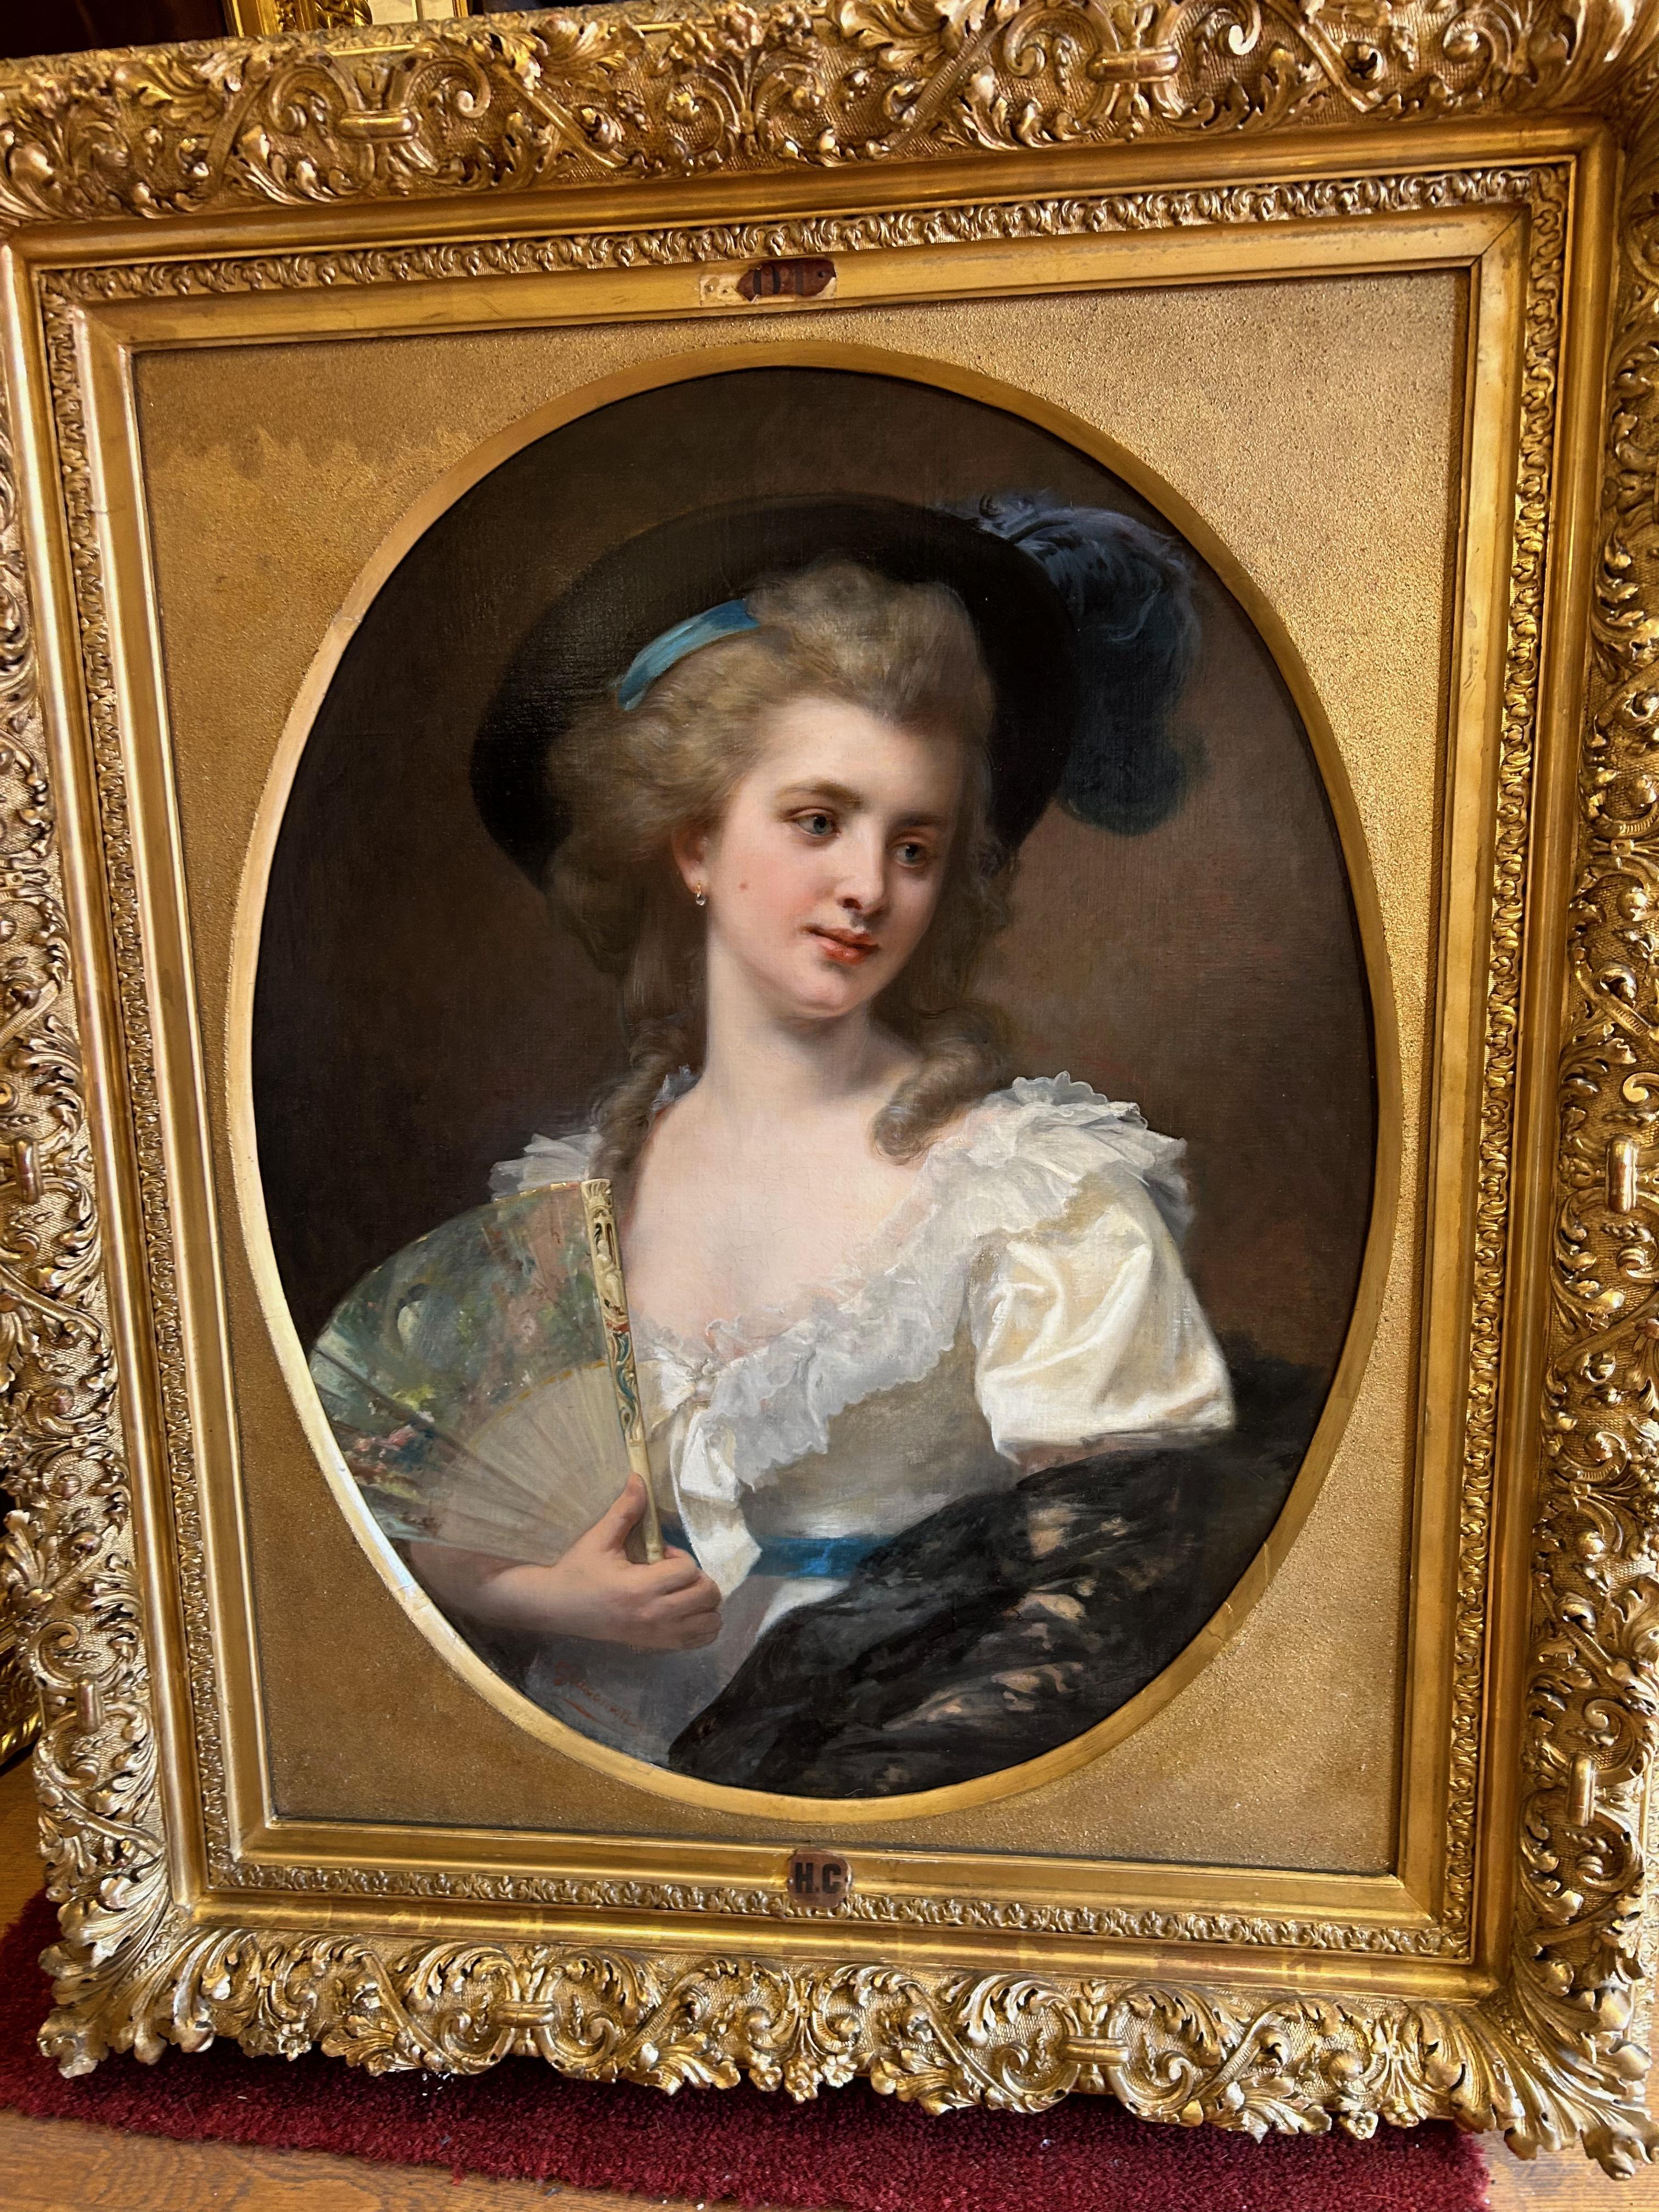 Who painted the picture of Marie Antoinette?